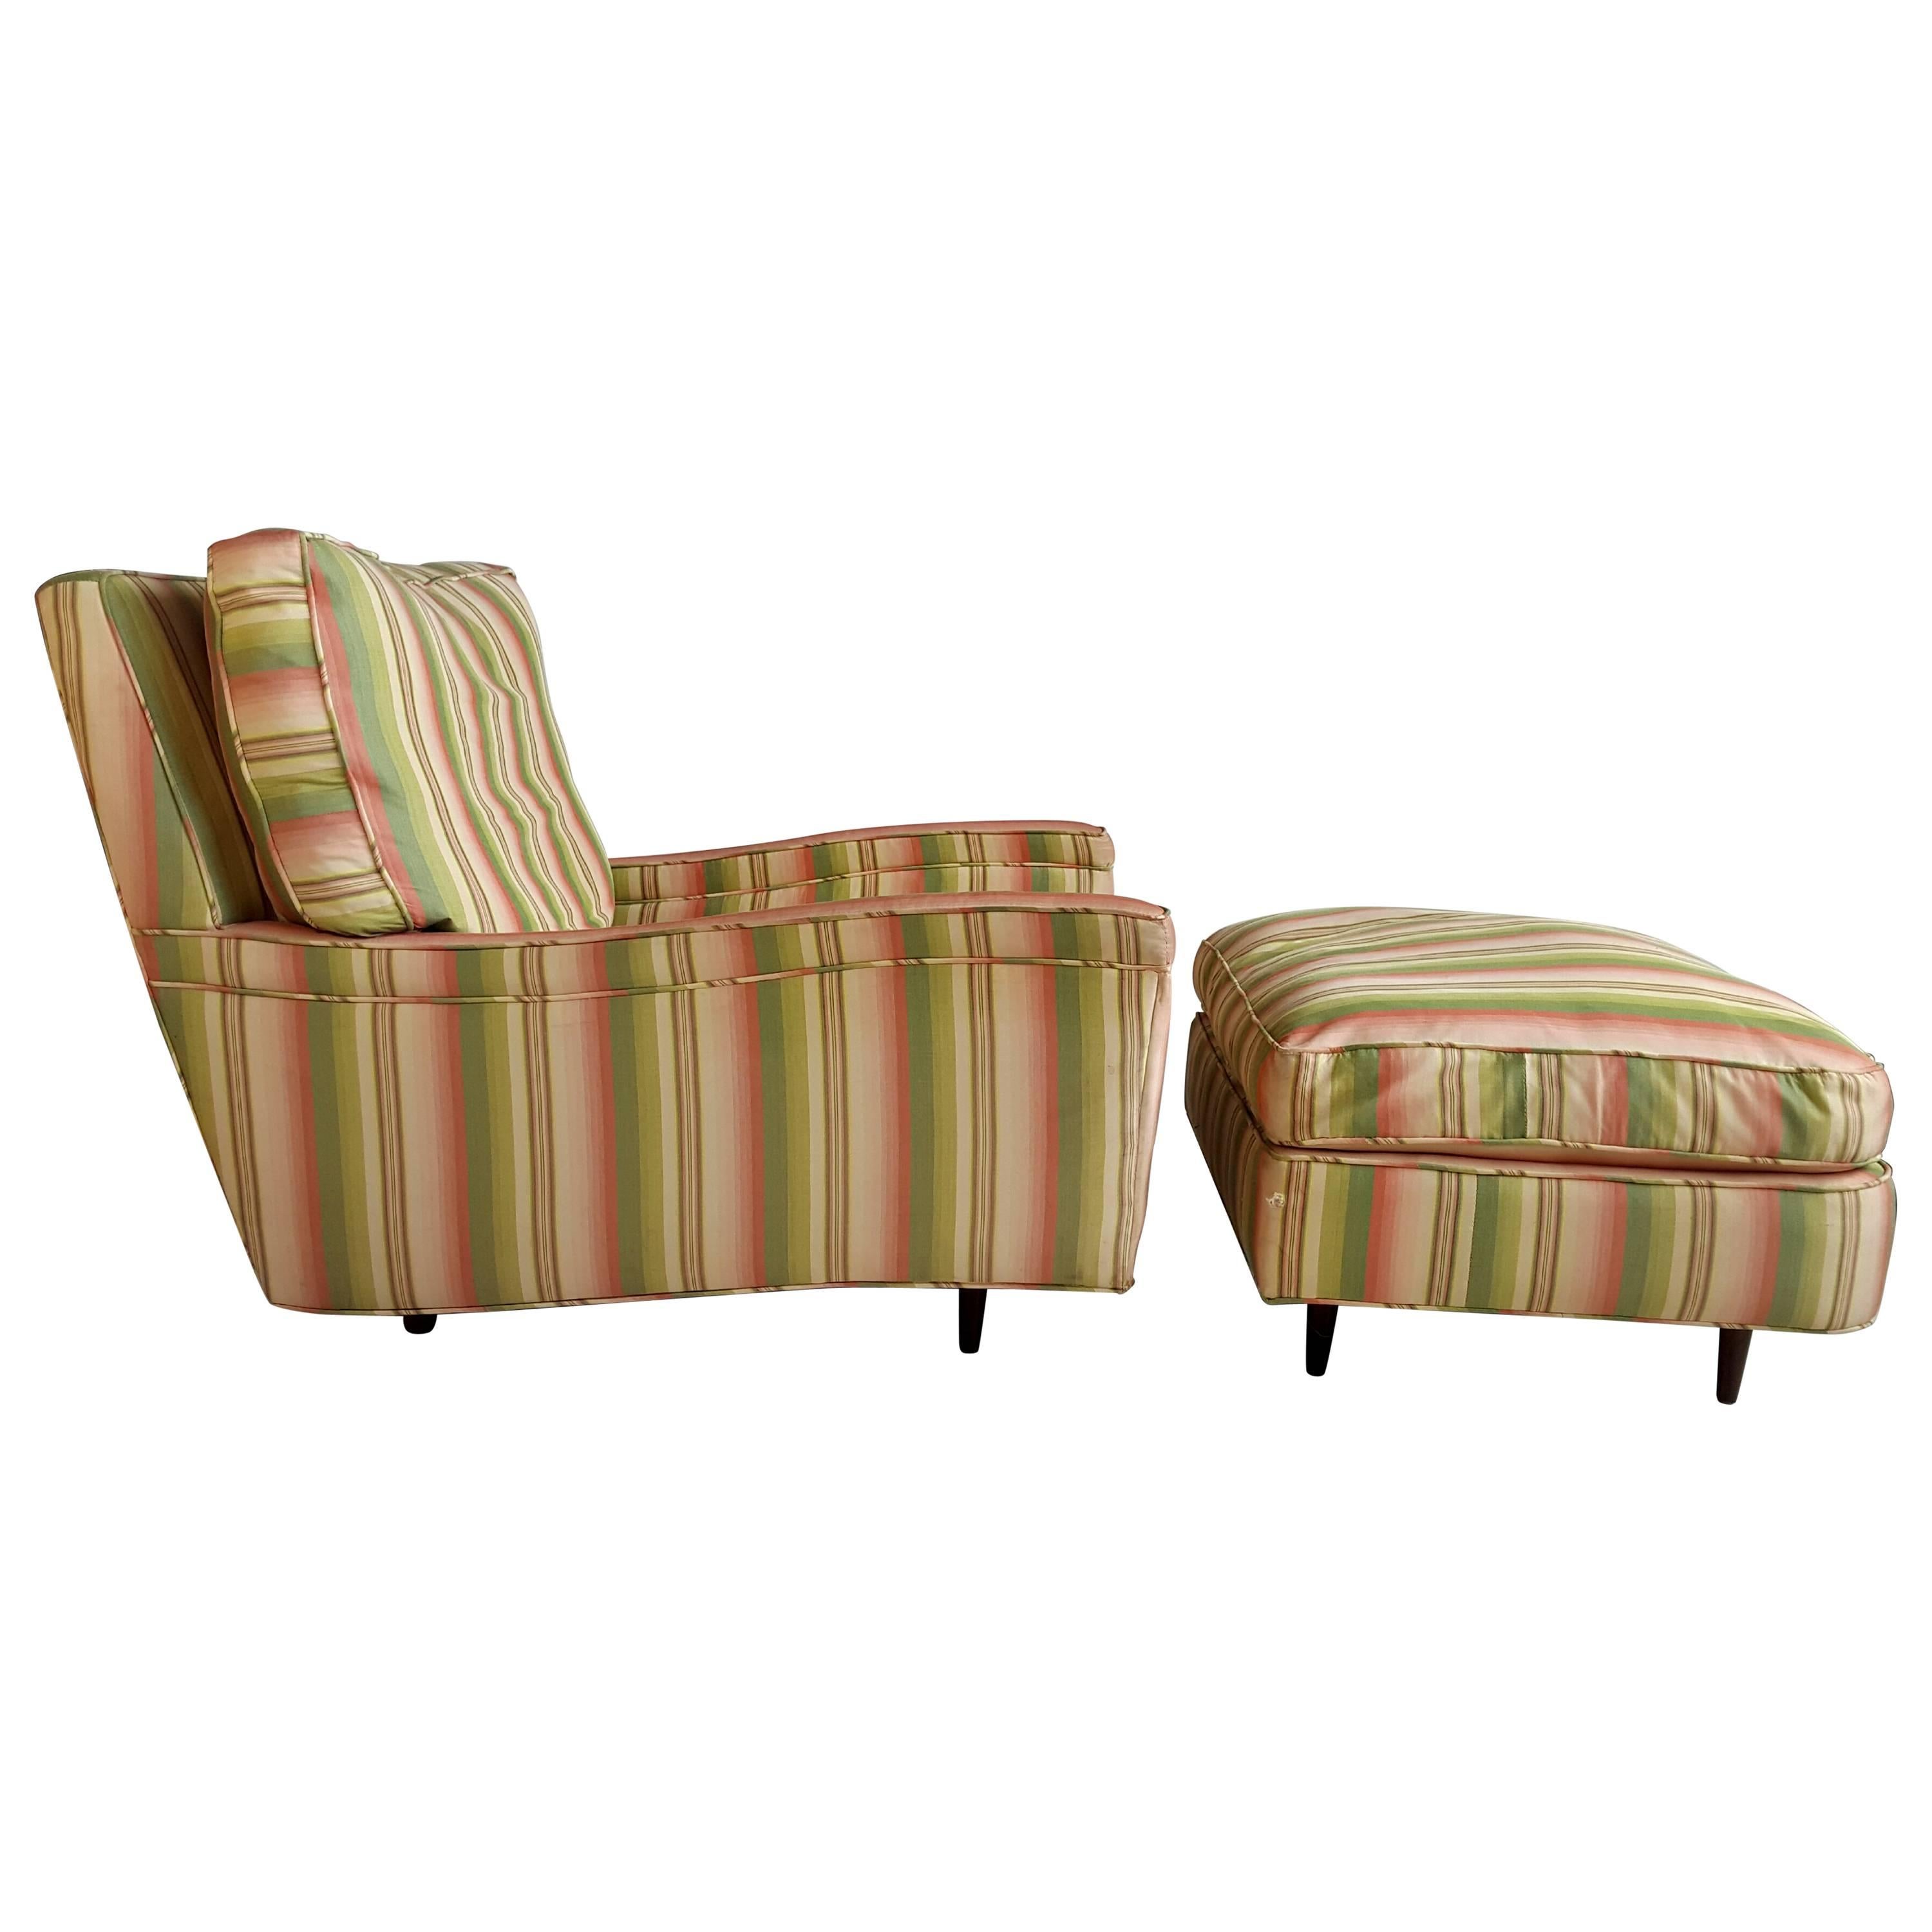 Oversized Art Deco Streamline Lounge Chair and Ottoman For Sale